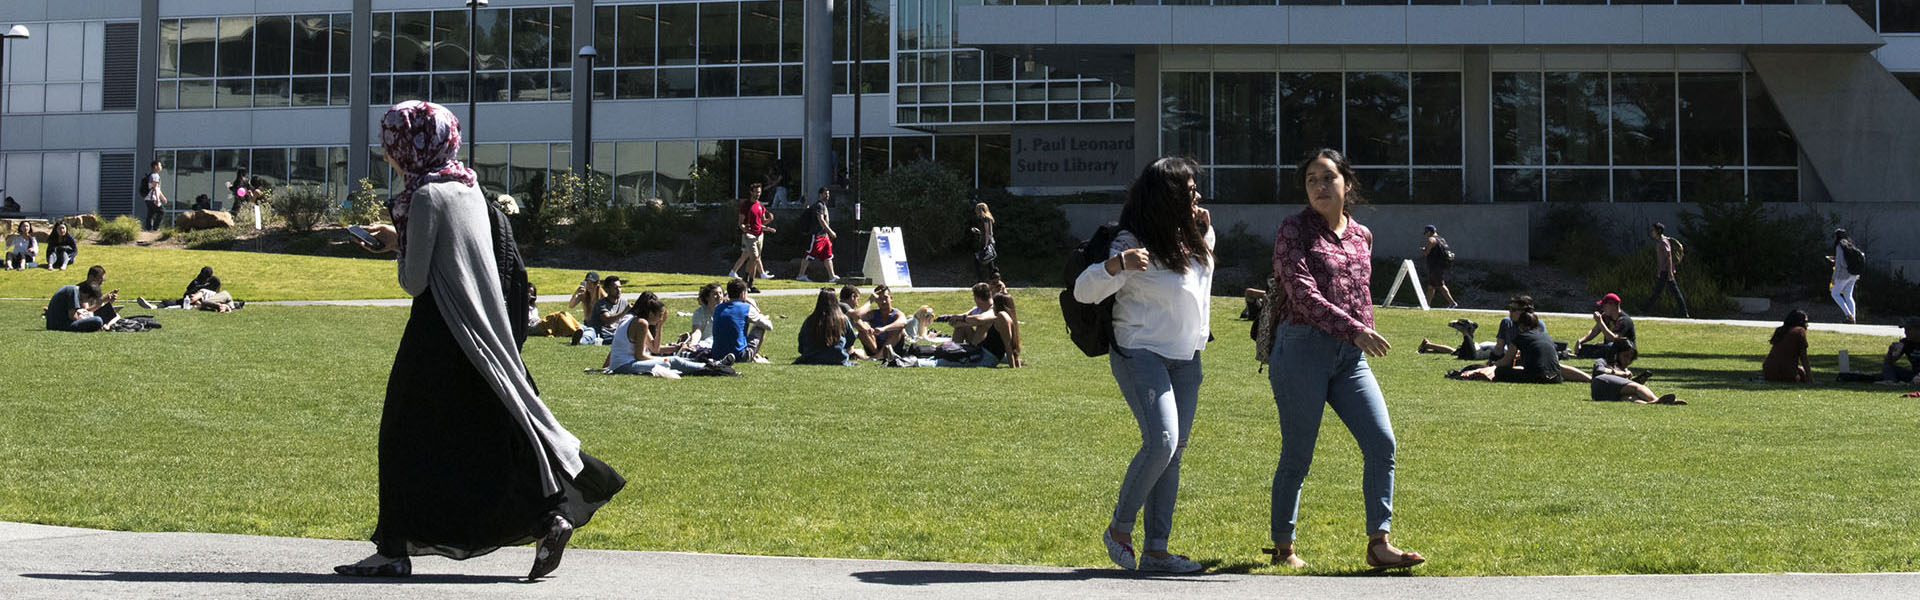 Students walk on the SF State campus